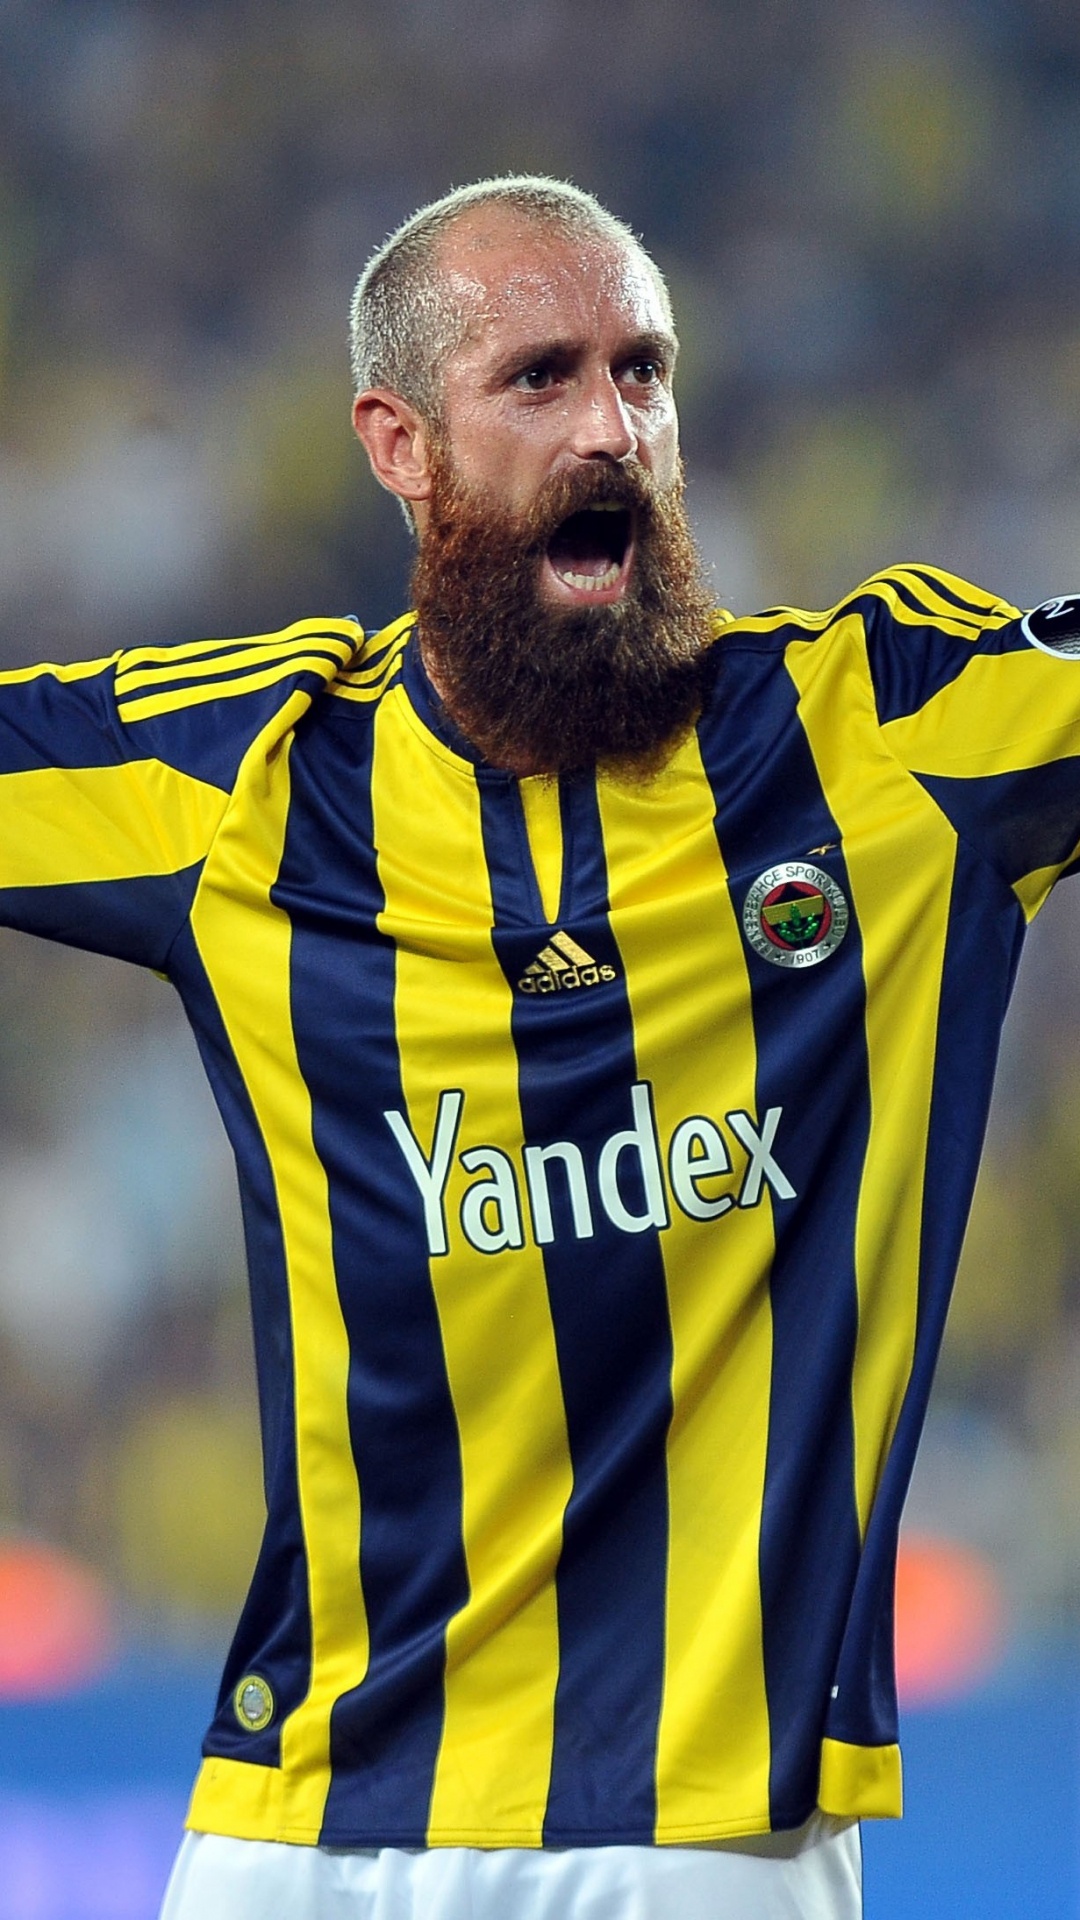 Man in Yellow and Blue Adidas Jersey Shirt. Wallpaper in 1080x1920 Resolution